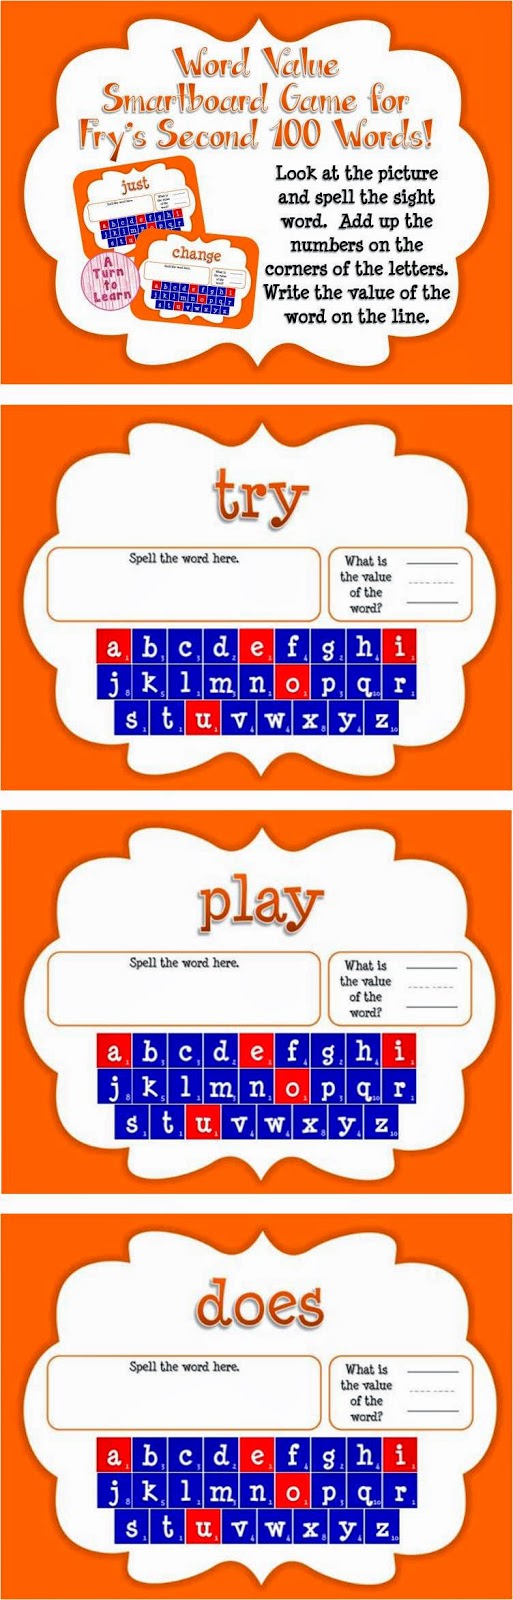 Word Value Game for Fry's 2nd 100 Words - Smartboard or Promethean Board! 